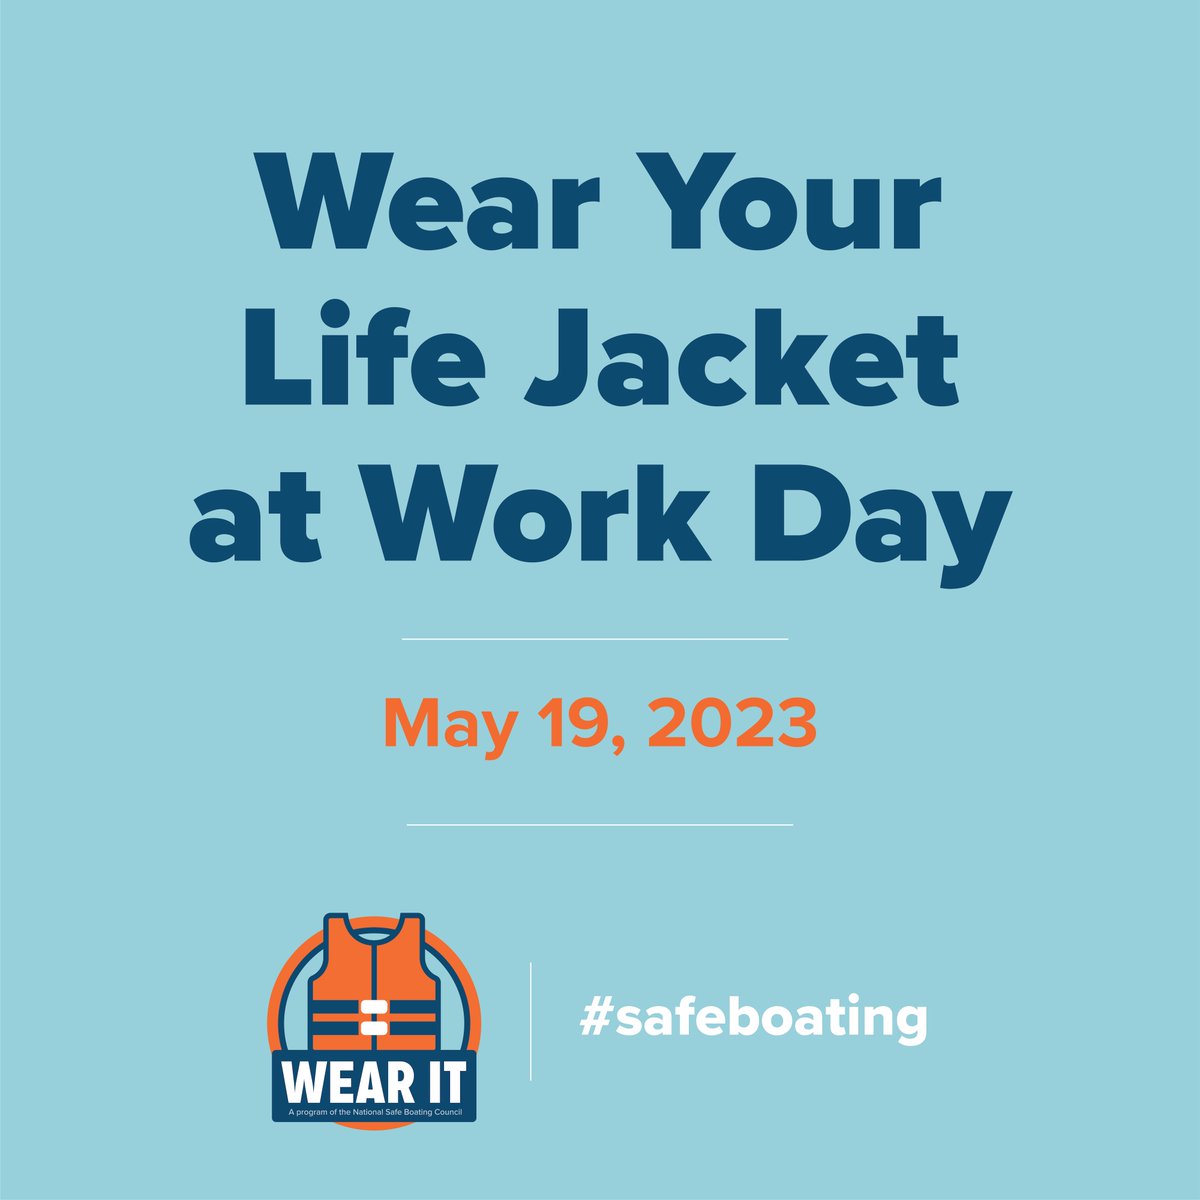 How to participate: Boaters share a picture of themselves wearing a life jacket at work (or home) on social media along with the hashtag #wearyourlifejacketatworkday and tag @SafeBoatingCampaign.